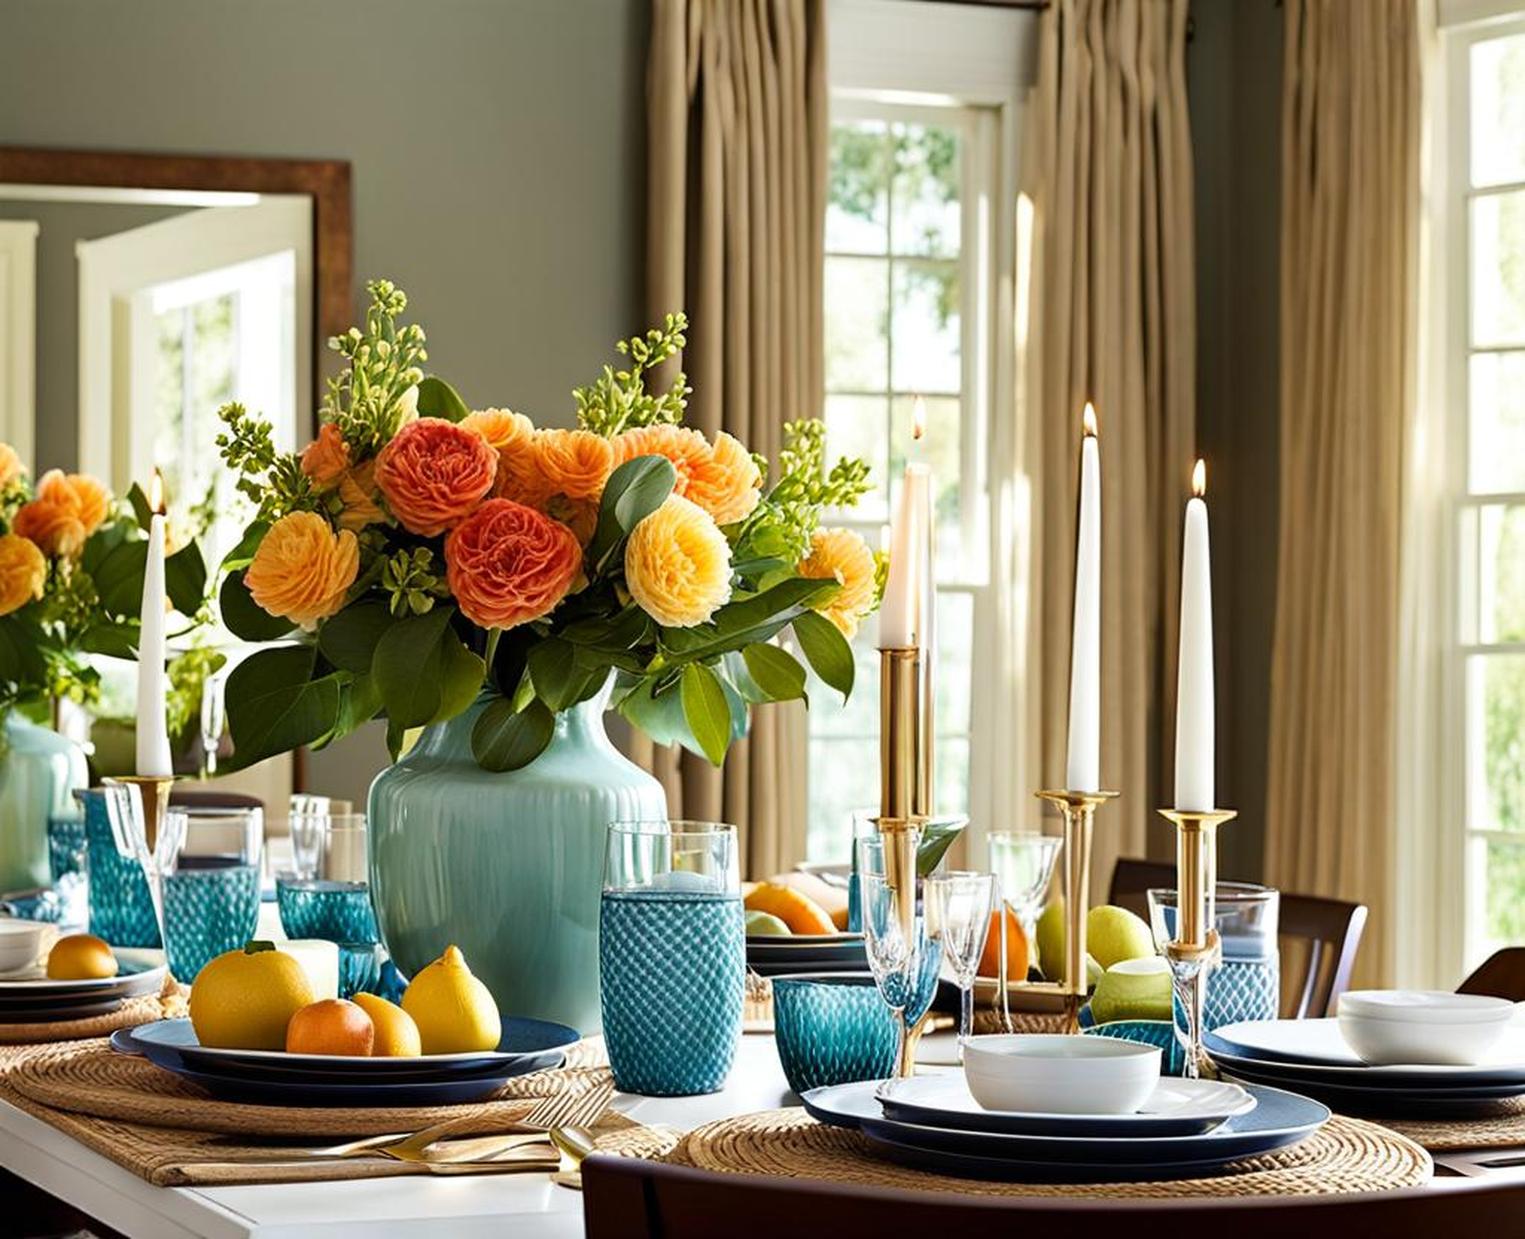 small dining table centerpiece ideas